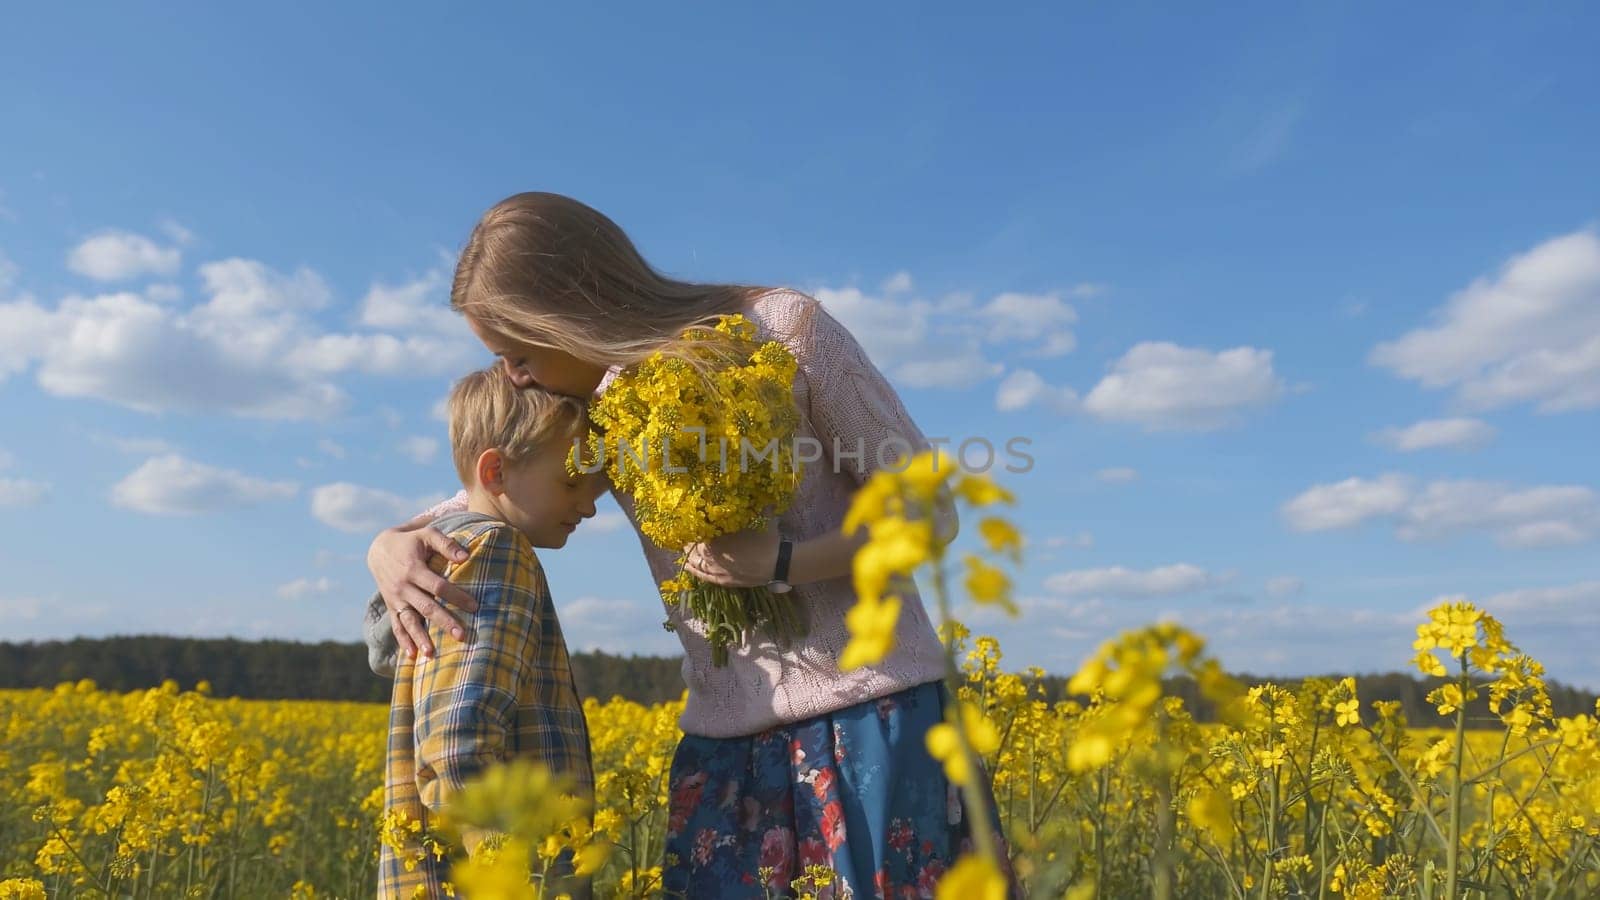 A loving son gives his mother rapeseed flowers in a rapeseed field